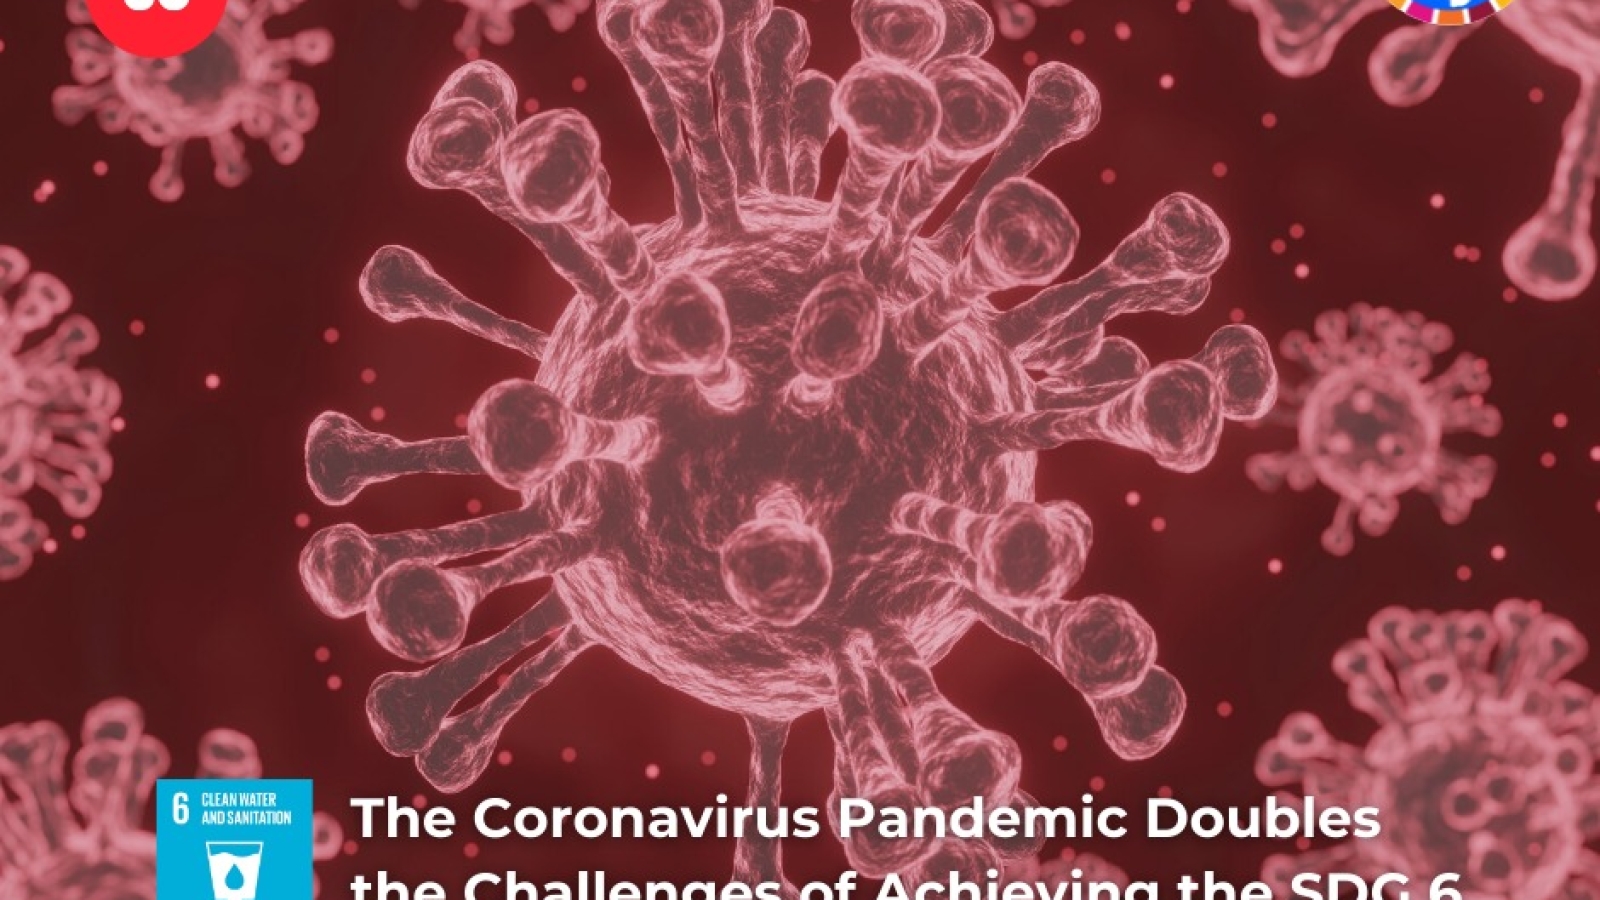 The Coronavirus Pandemic Doubles the Challenges of Achieving the SDG 6